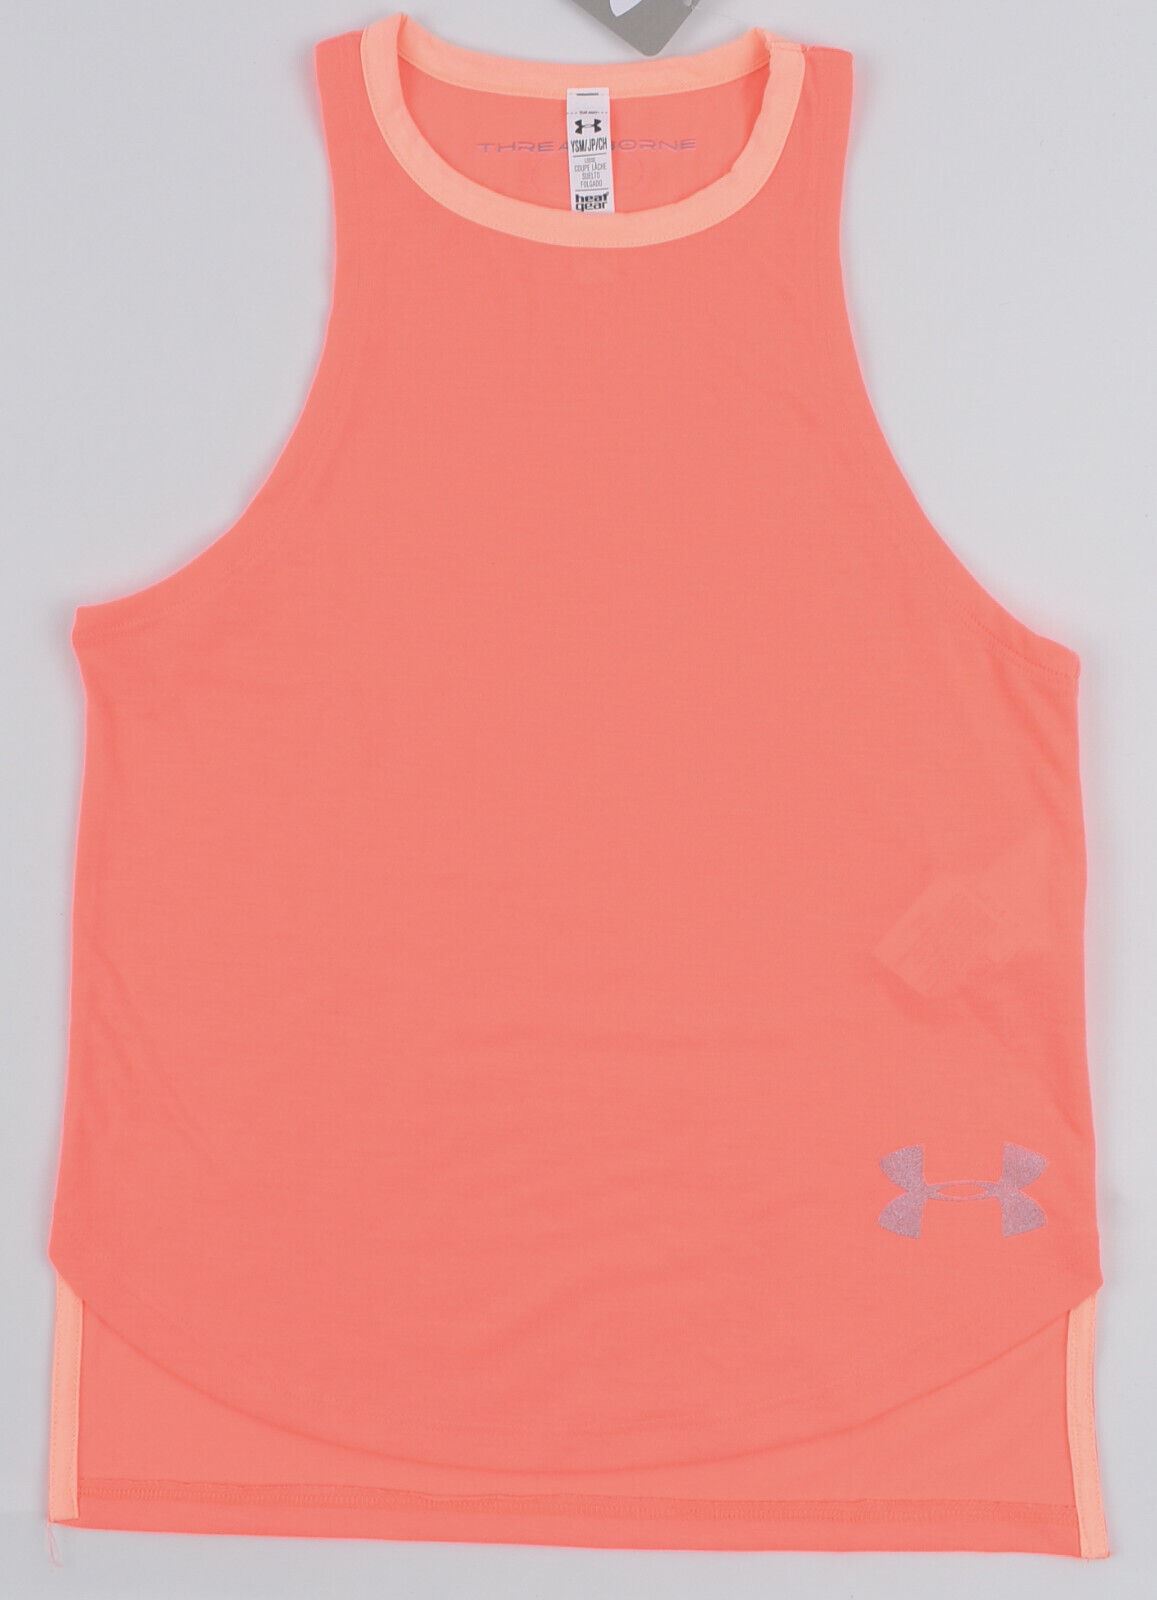 UNDER ARMOUR Girls' Threadborne Play Up Tank Top, Coral, size 7-8 years